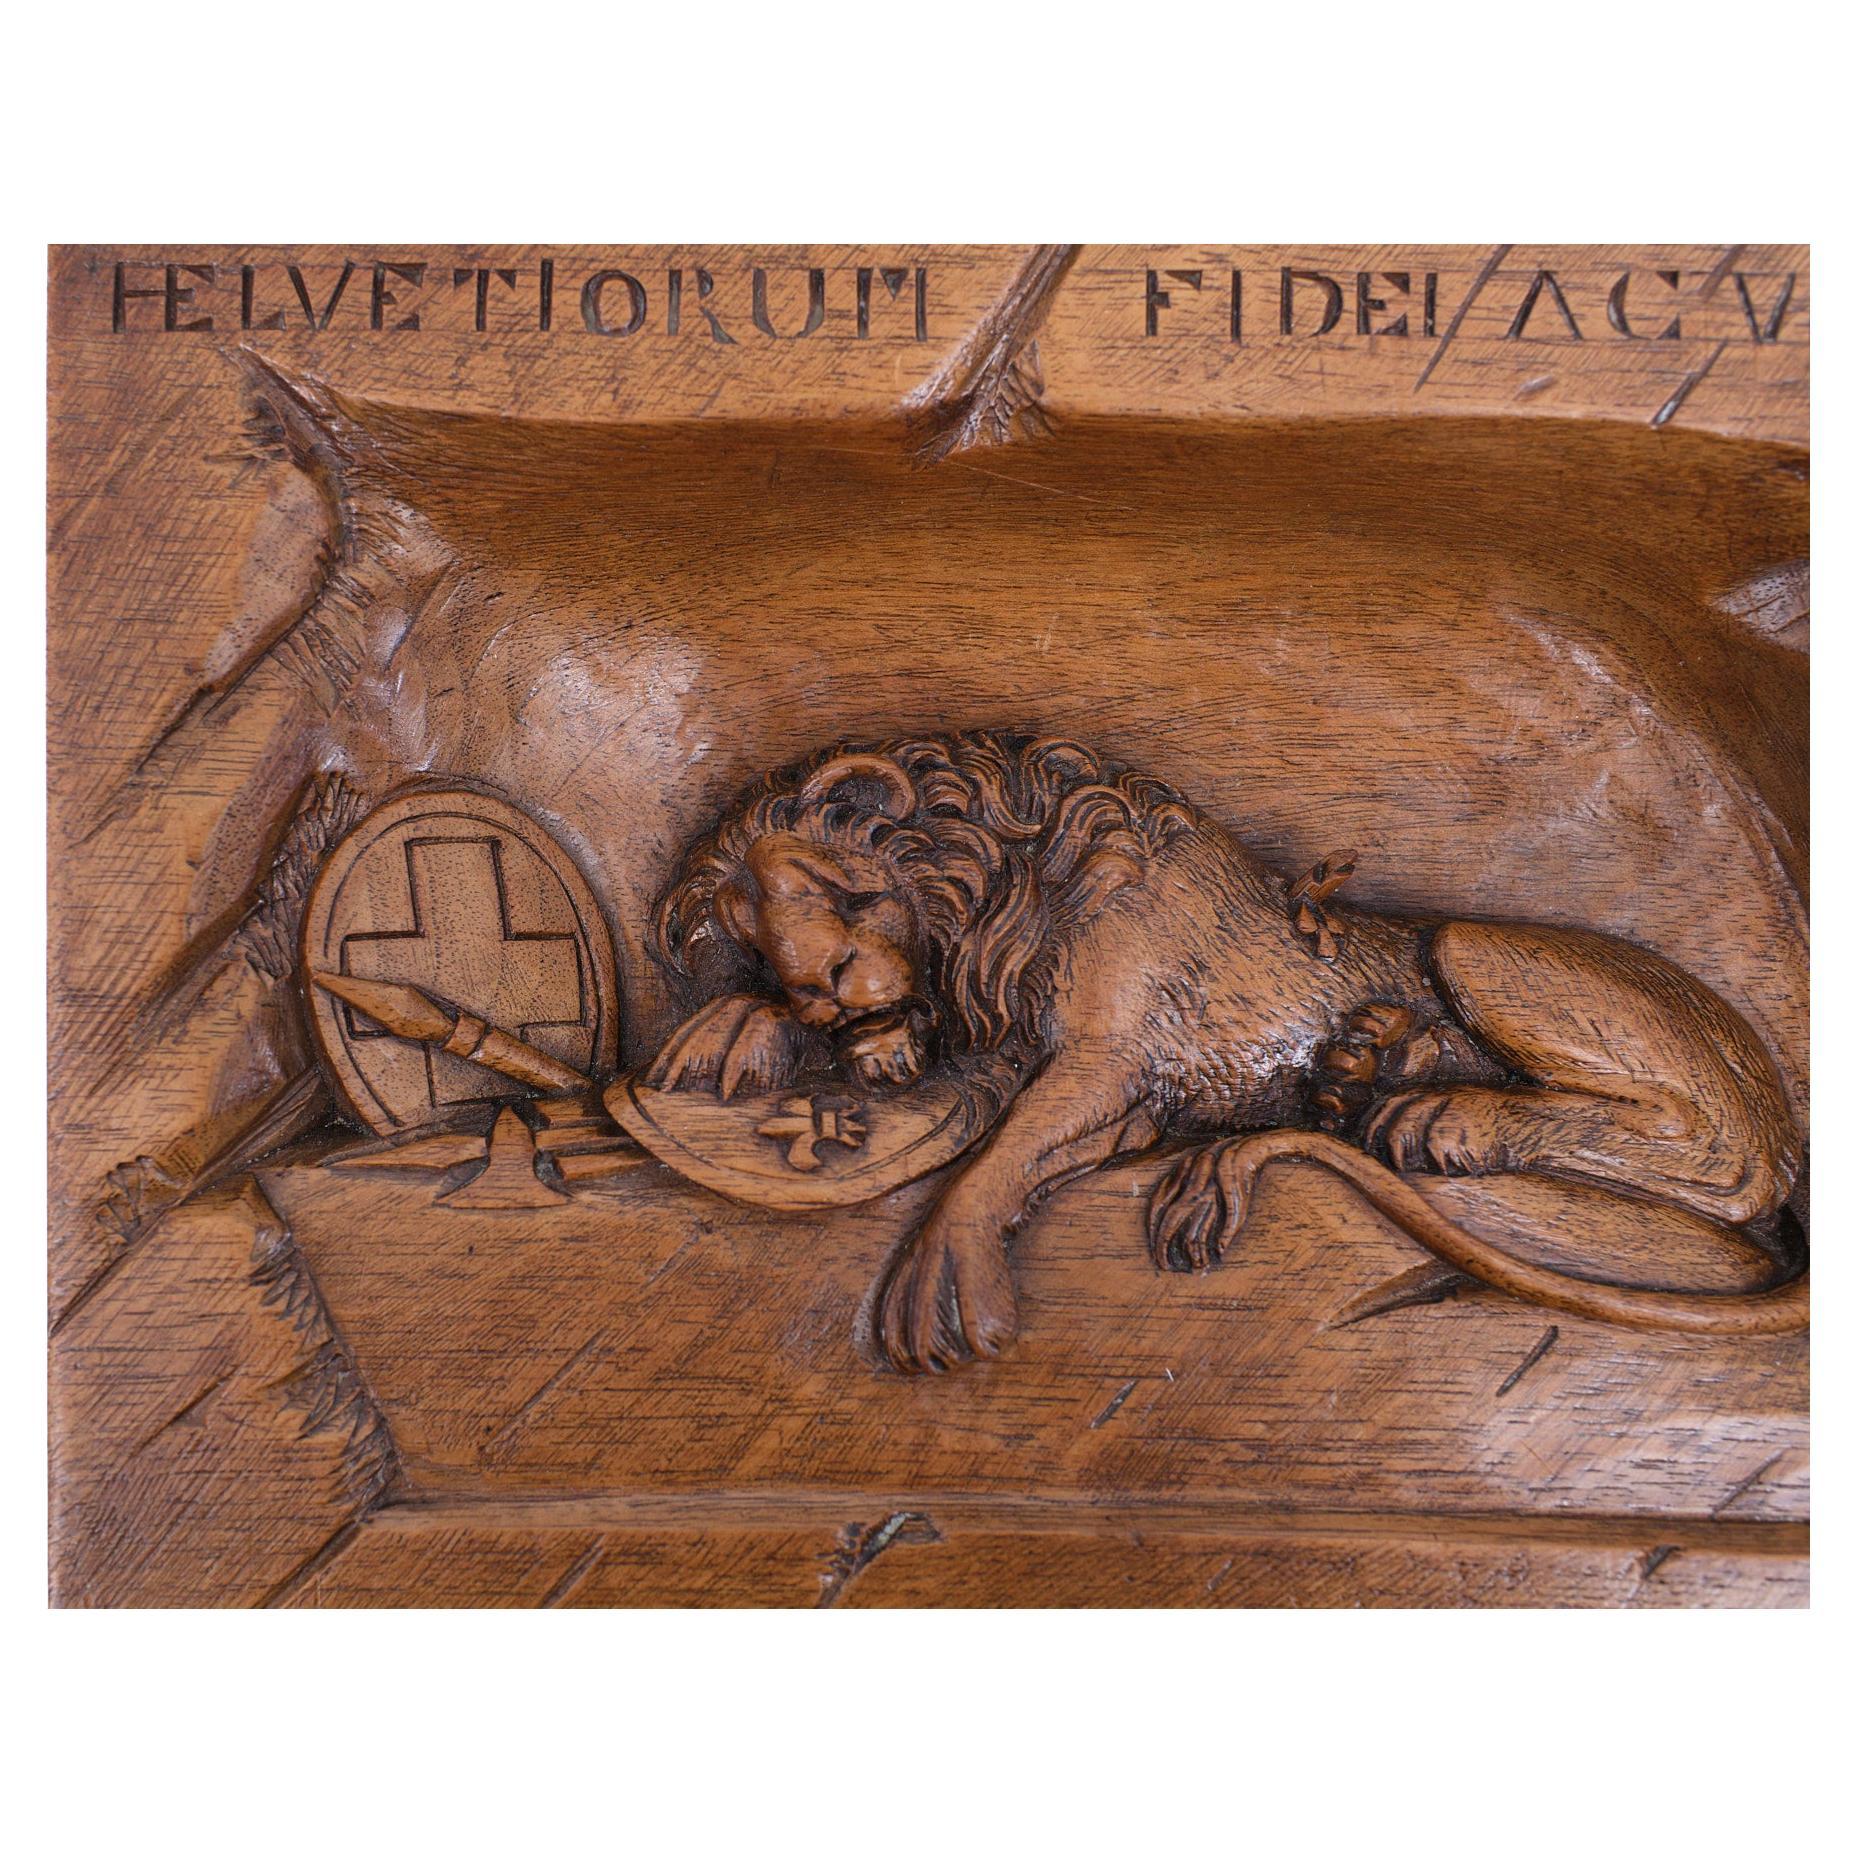 Fine lion wood carving relief depicting the Swiss deadly wounded lion of Luzerne. The original statue reminds of the deadly wounded Swiss guardsmen of 1792. Brienz, circa 1900.